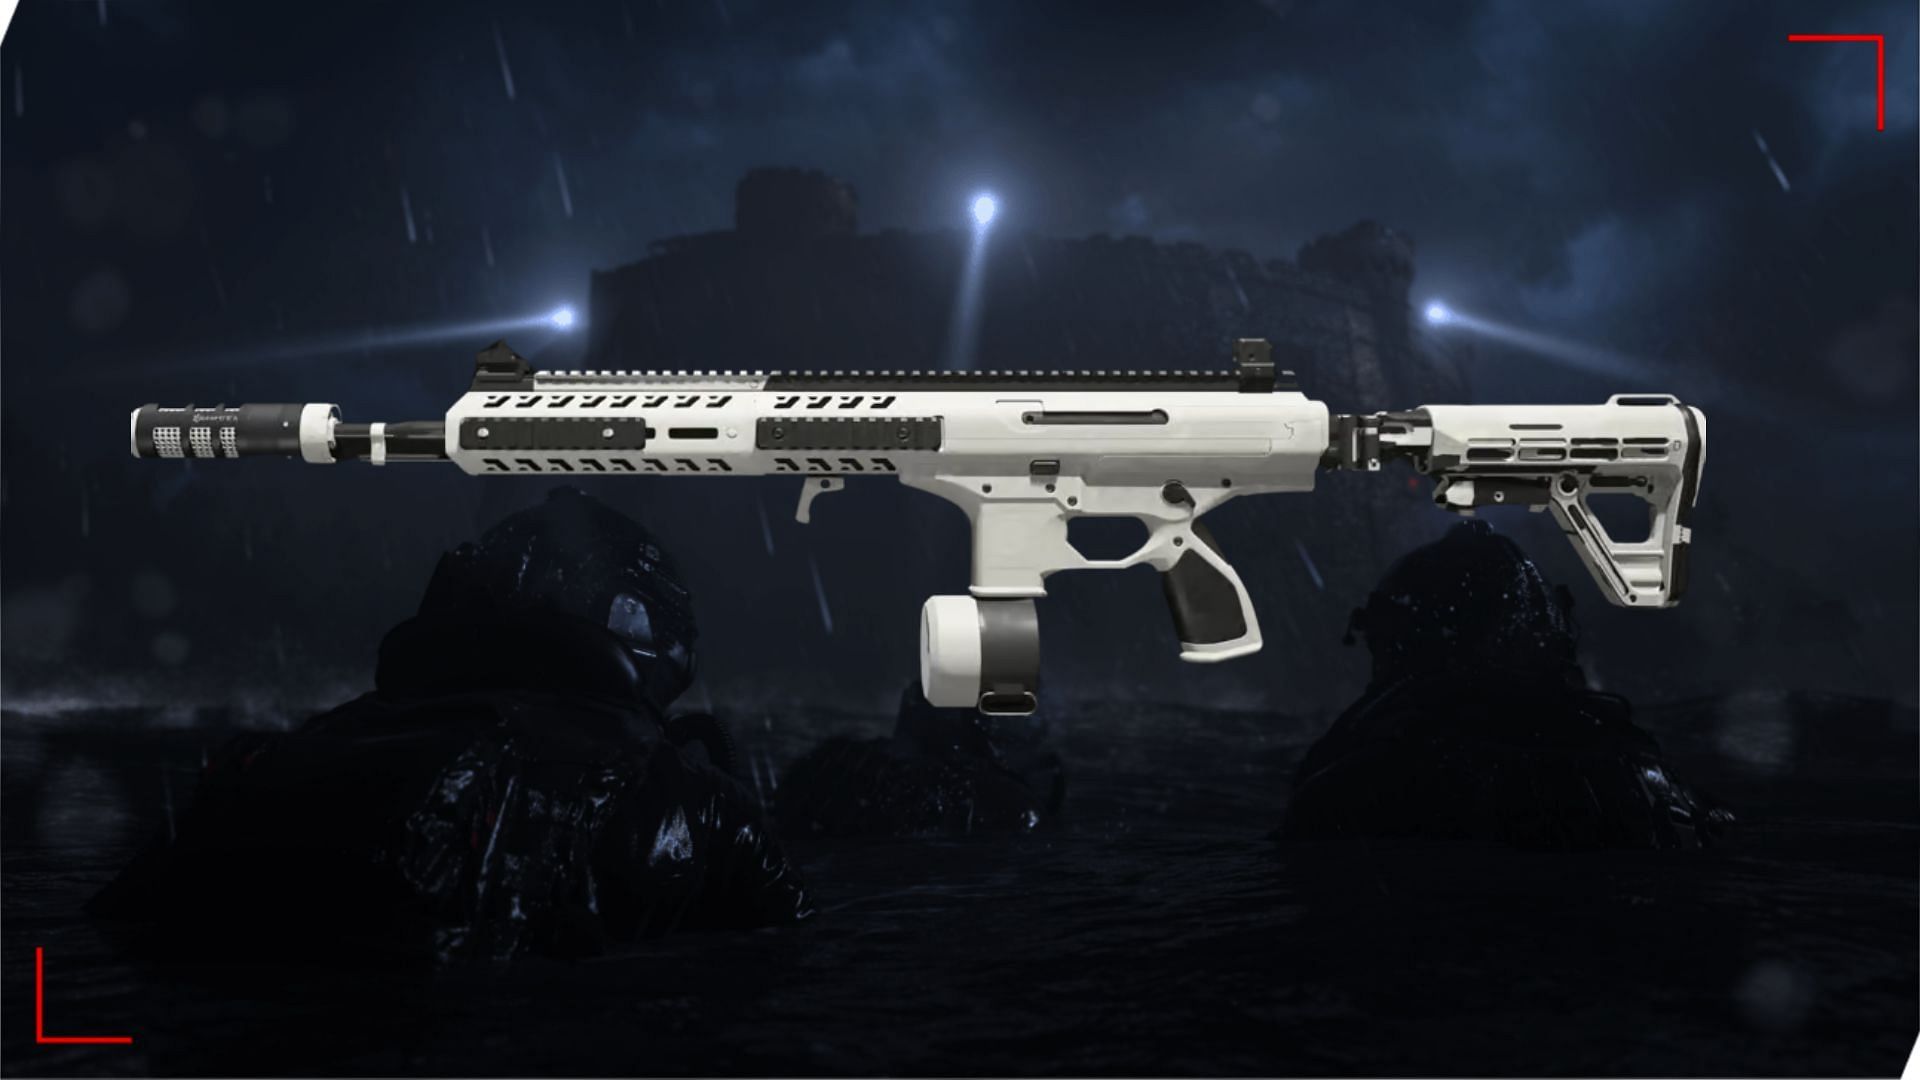 HRM-9 SMG in MW3 Season 3 (Image via Activision)